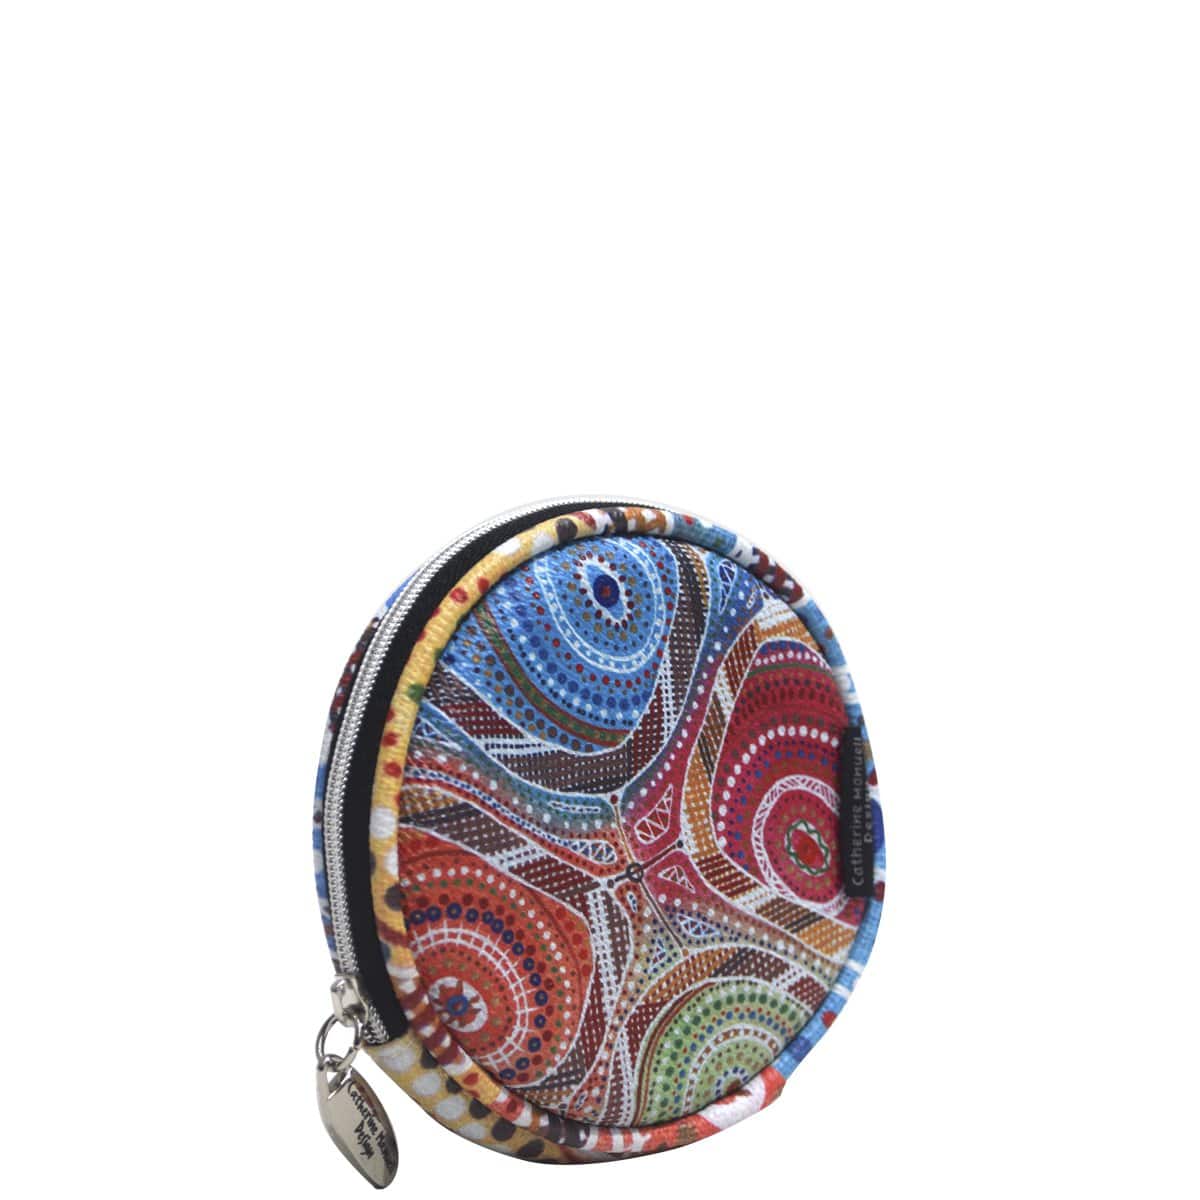 Full Moon Coin Purse AAP - Elements